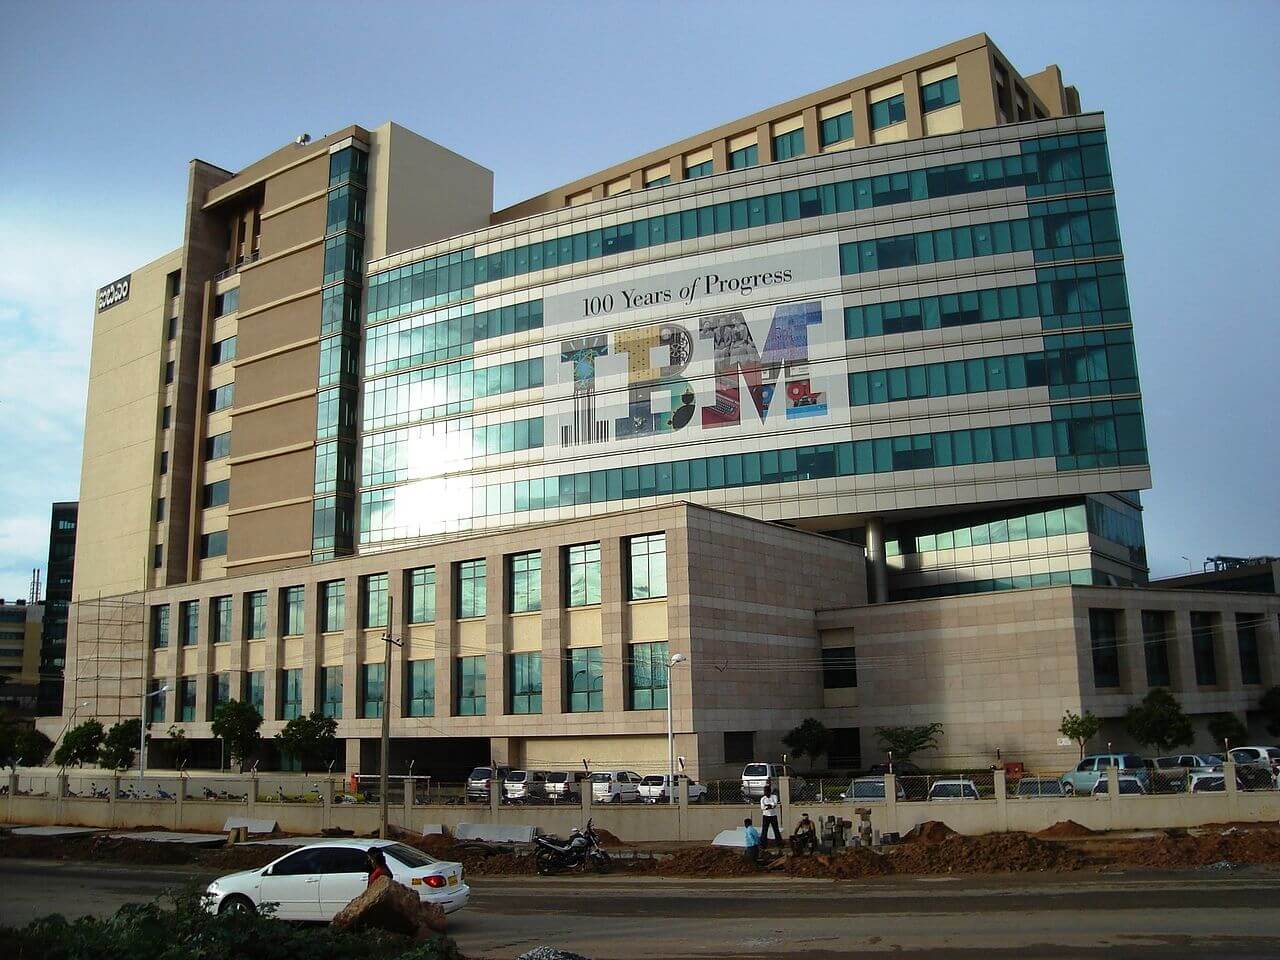 IBM Partners with Veridium to Release a Carbon Credit Based Coin